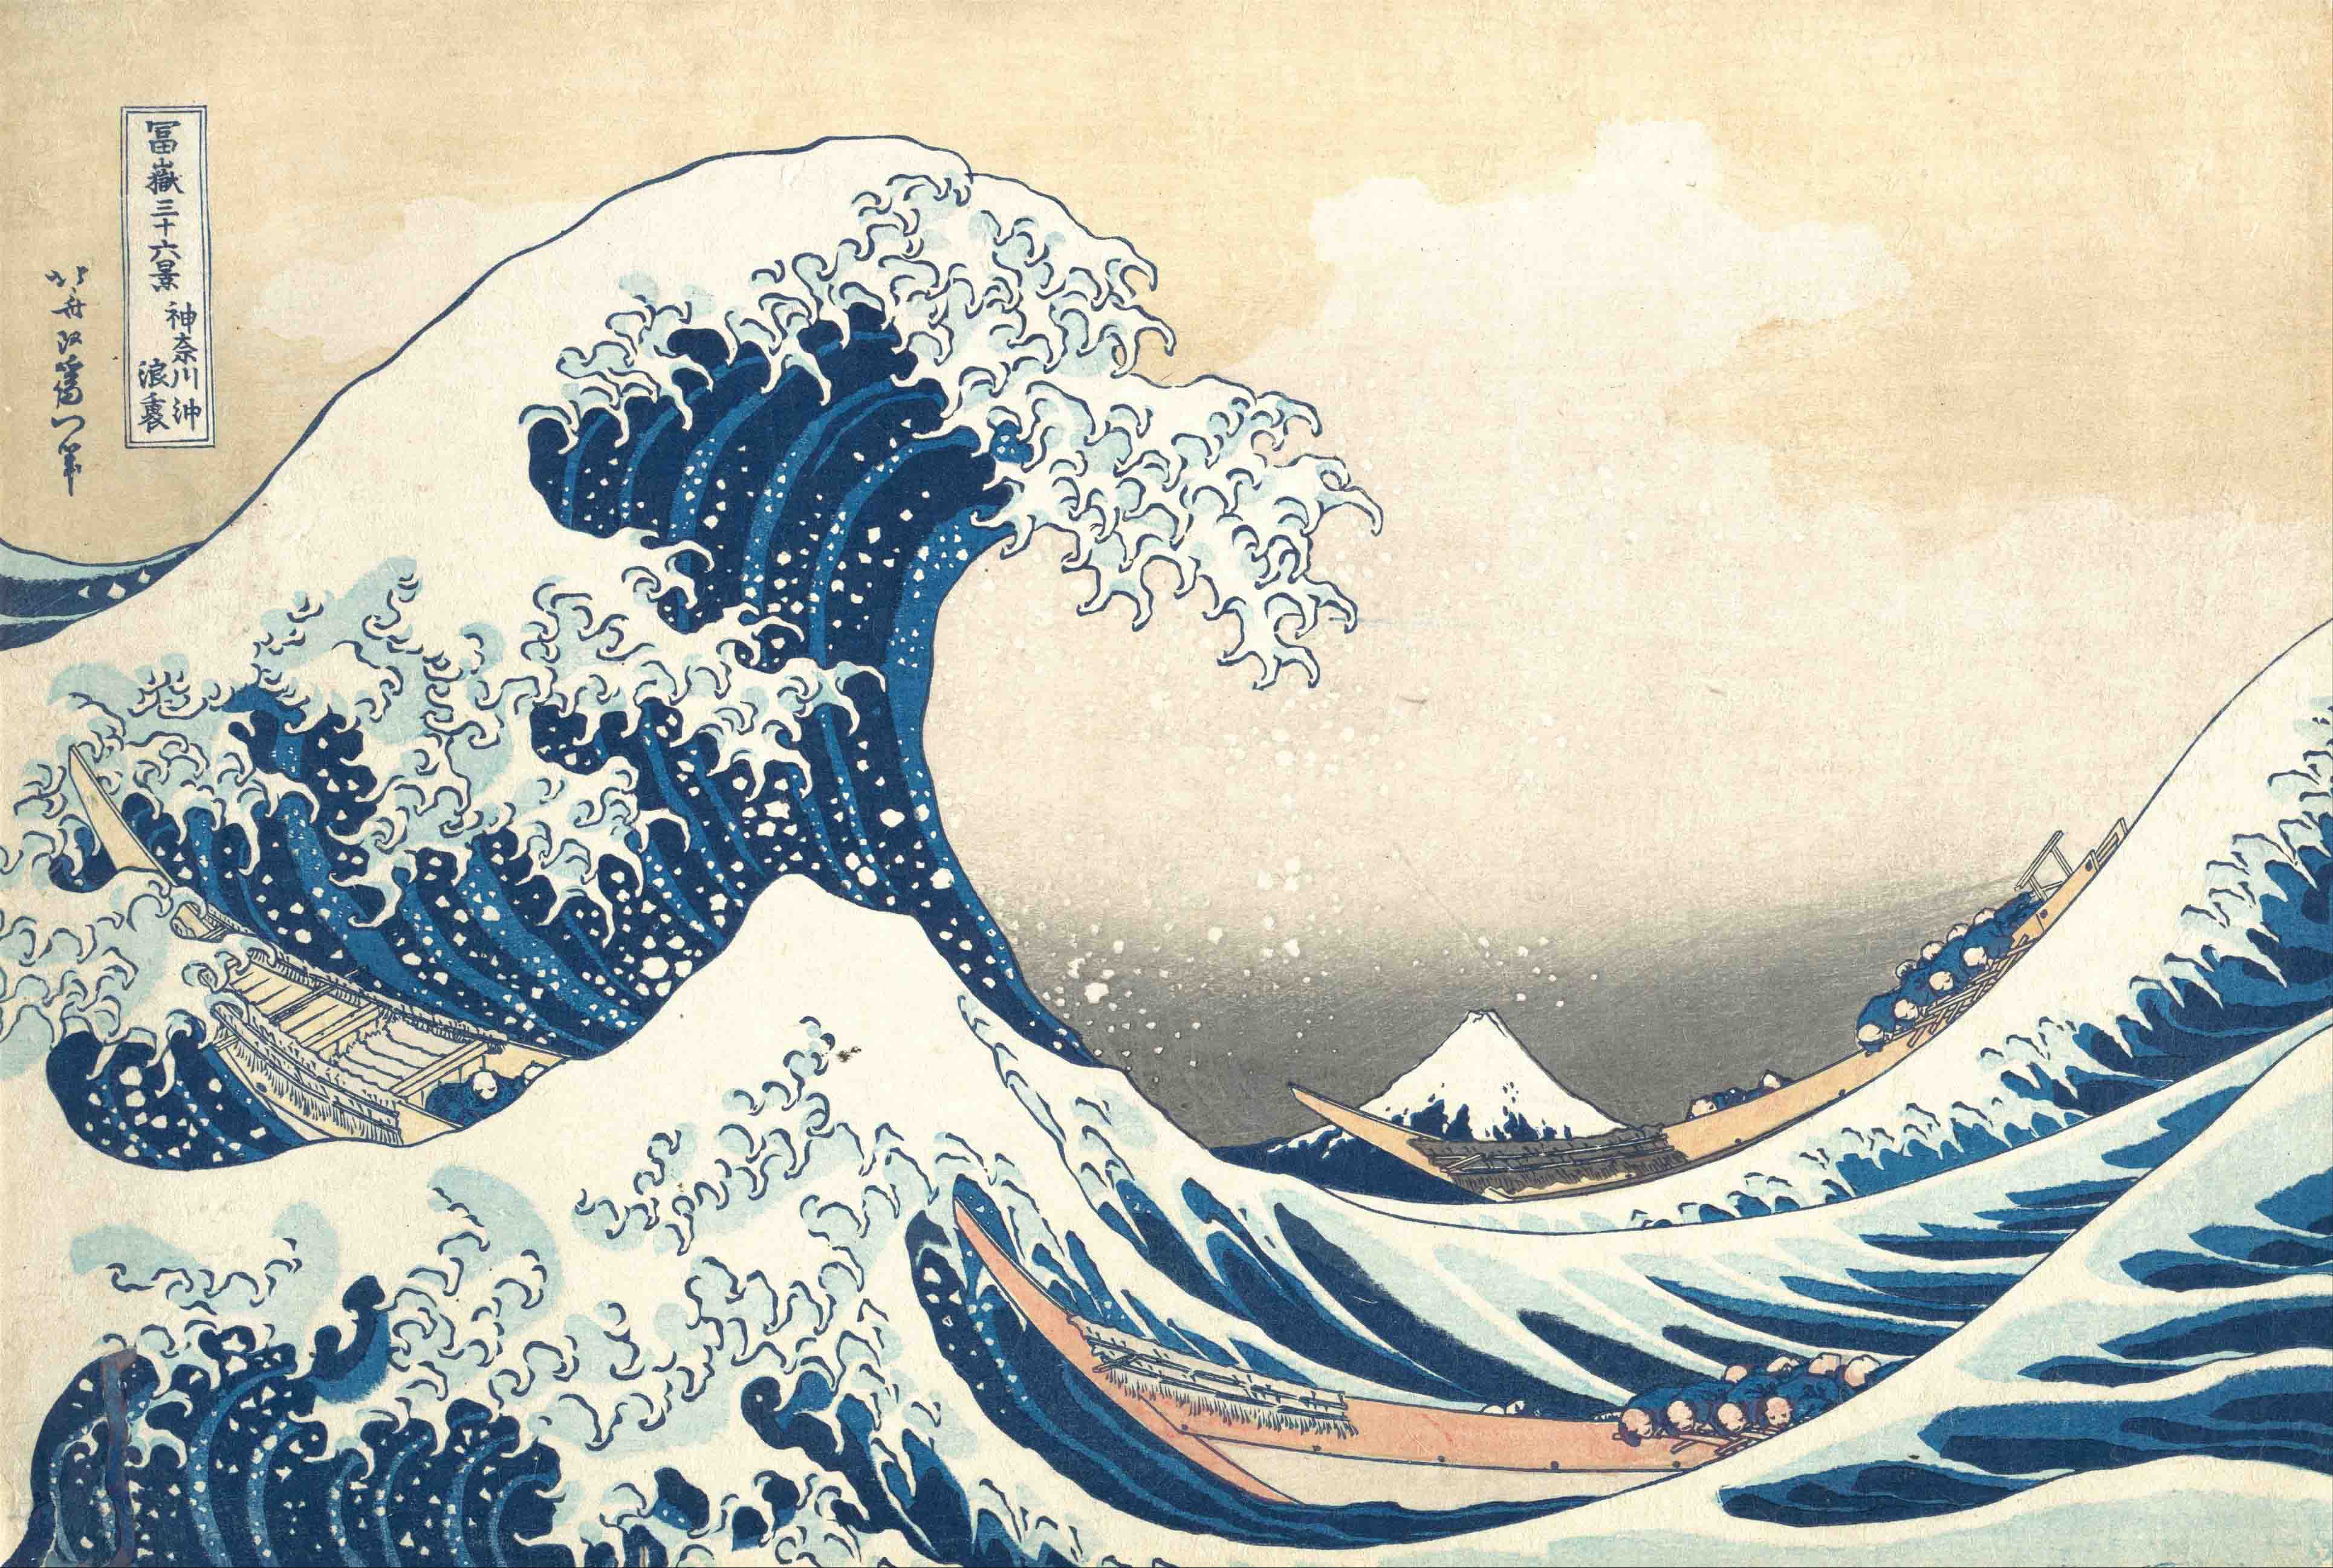 Focus on a work: The Great Wave off Kanagawa by Hokusai - Art Shortlist